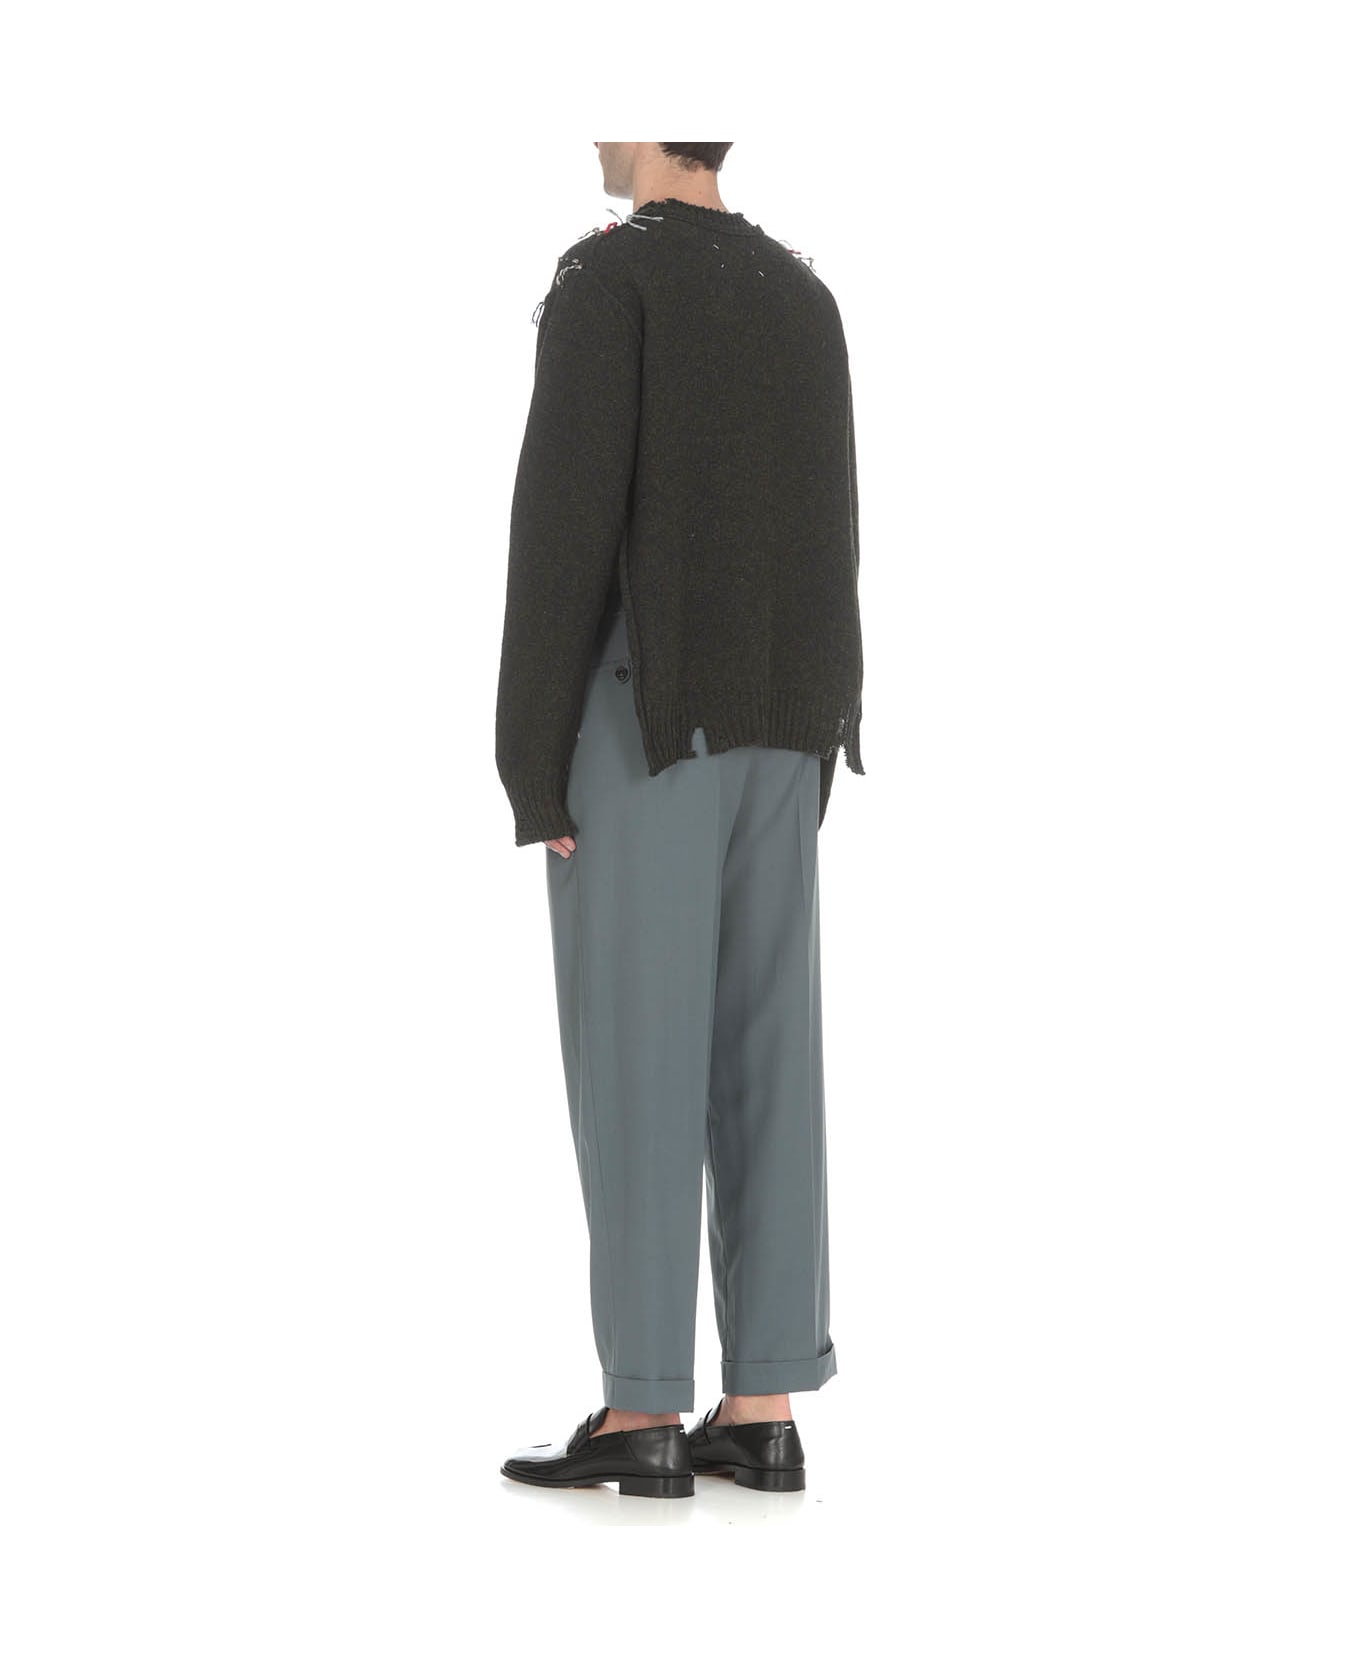 Maison Margiela Sweater With Cut-out Details - Green ニットウェア